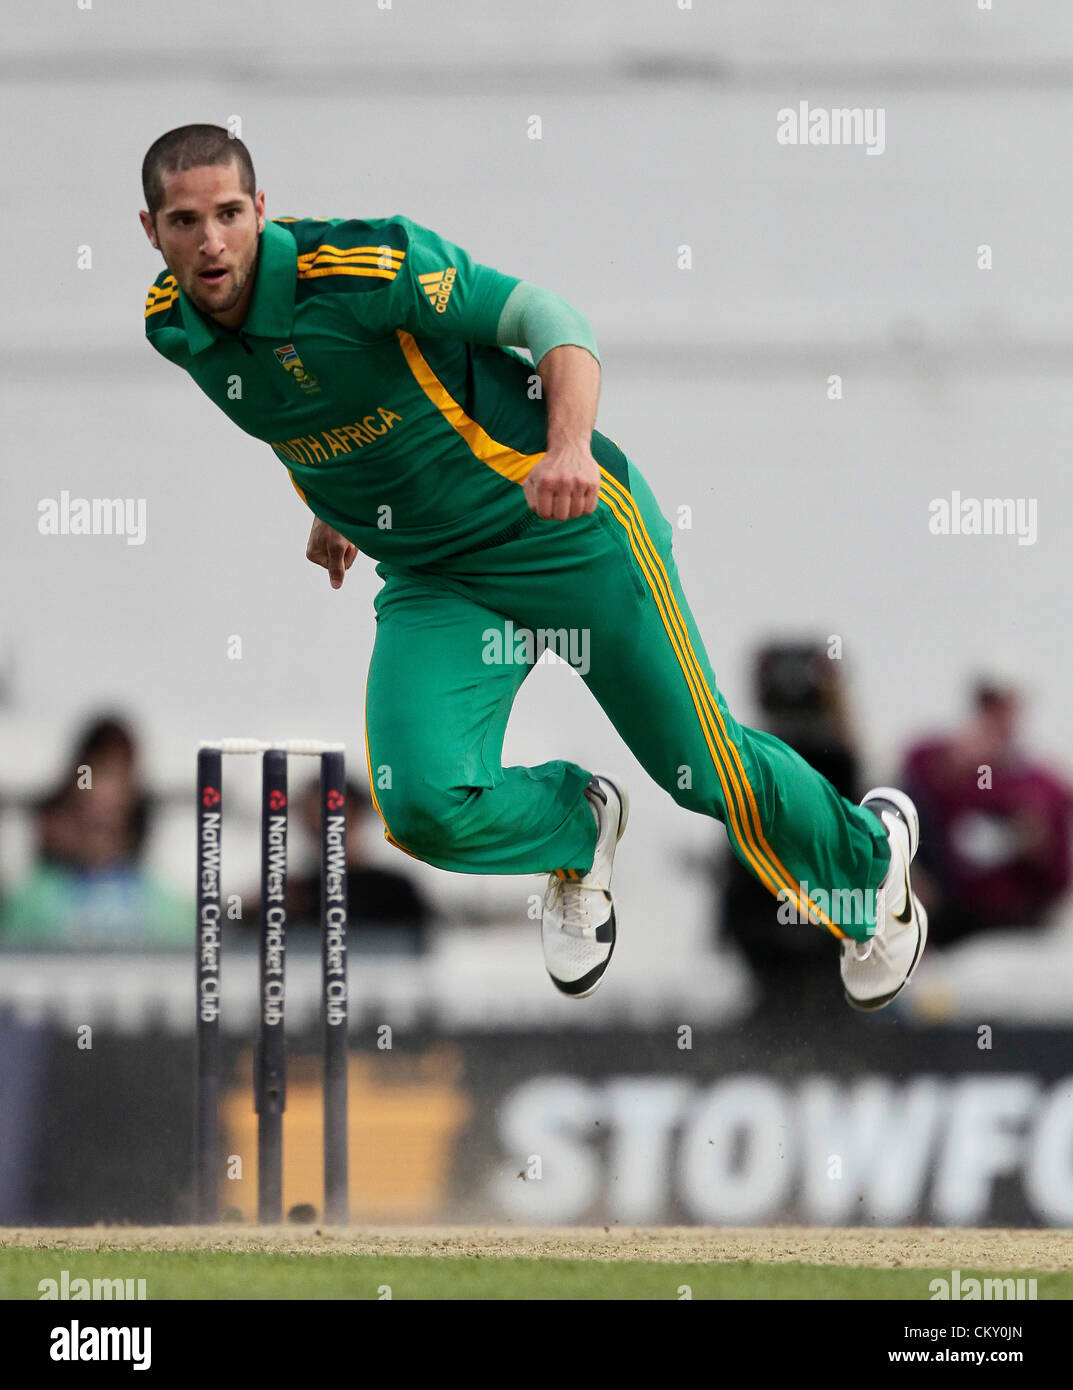 31.08.2012. London England Wyane Parnell in bowling action during the England v South Africa: 3rd Natwest ODI at The Kia Oval Cricket Ground Kennington London England. England chasing 212 to win this ODI Stock Photo